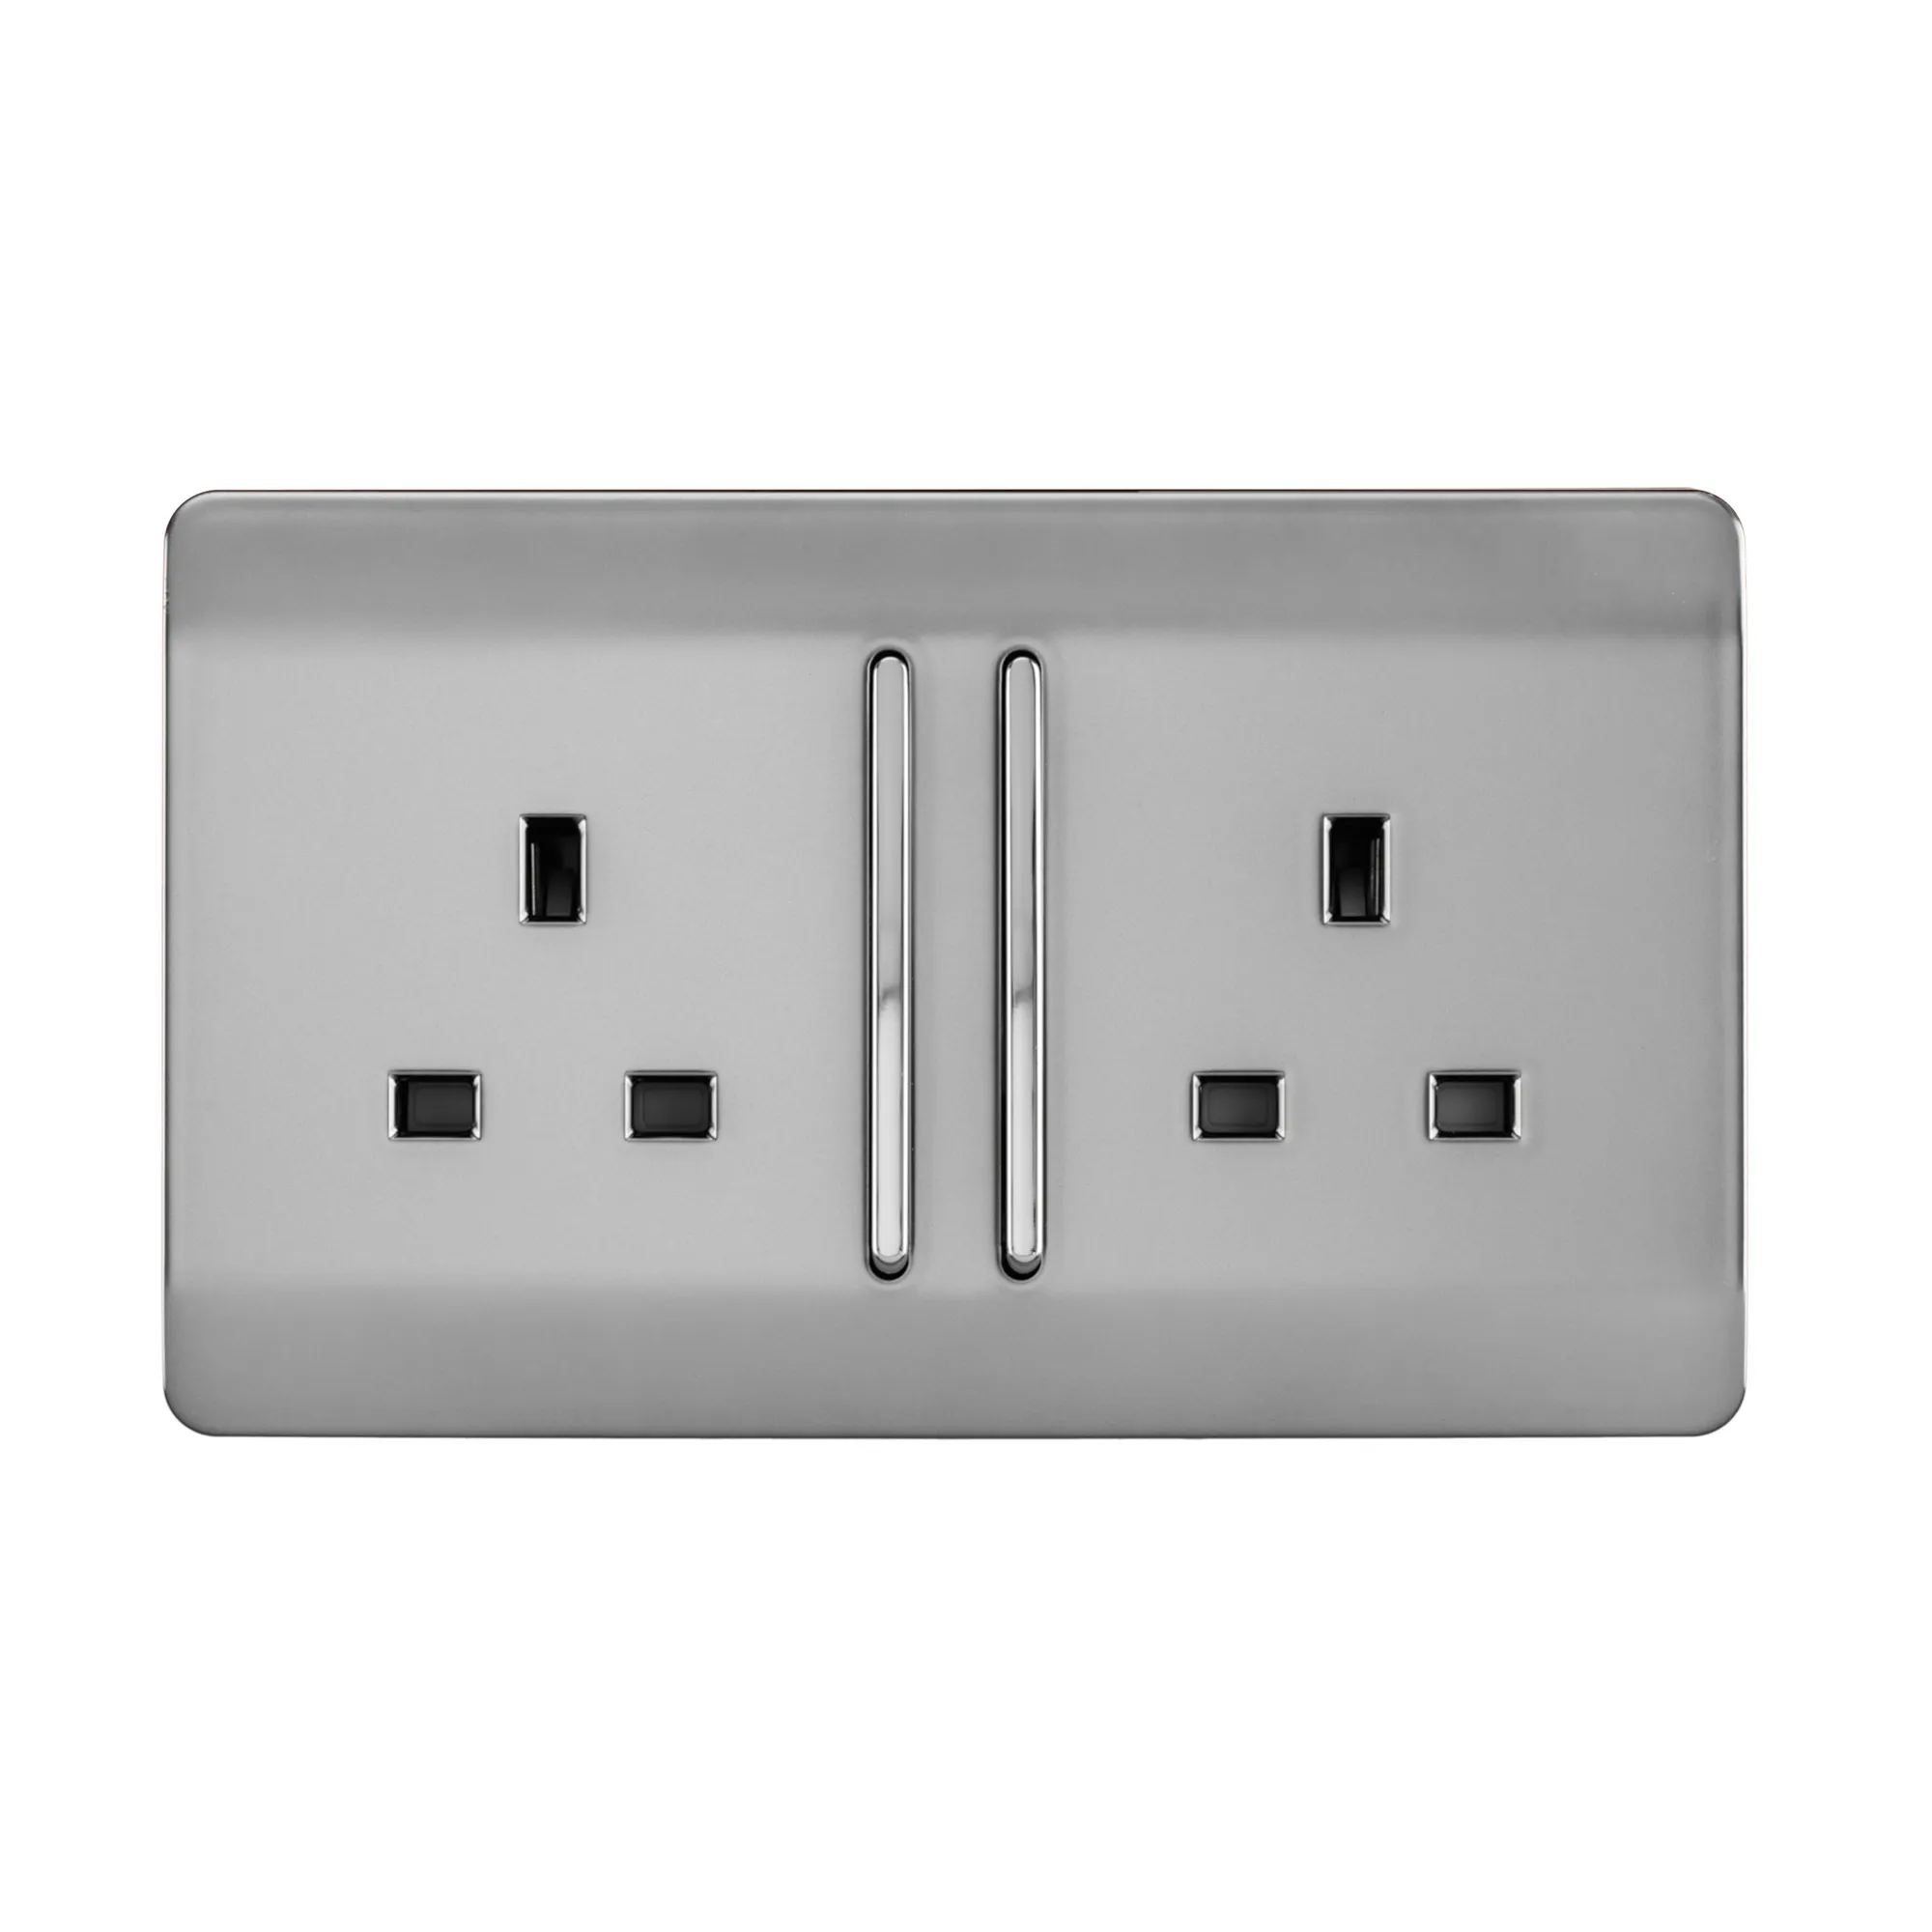 2 Gang 13Amp Long Switched Double Socket Brushed Steel